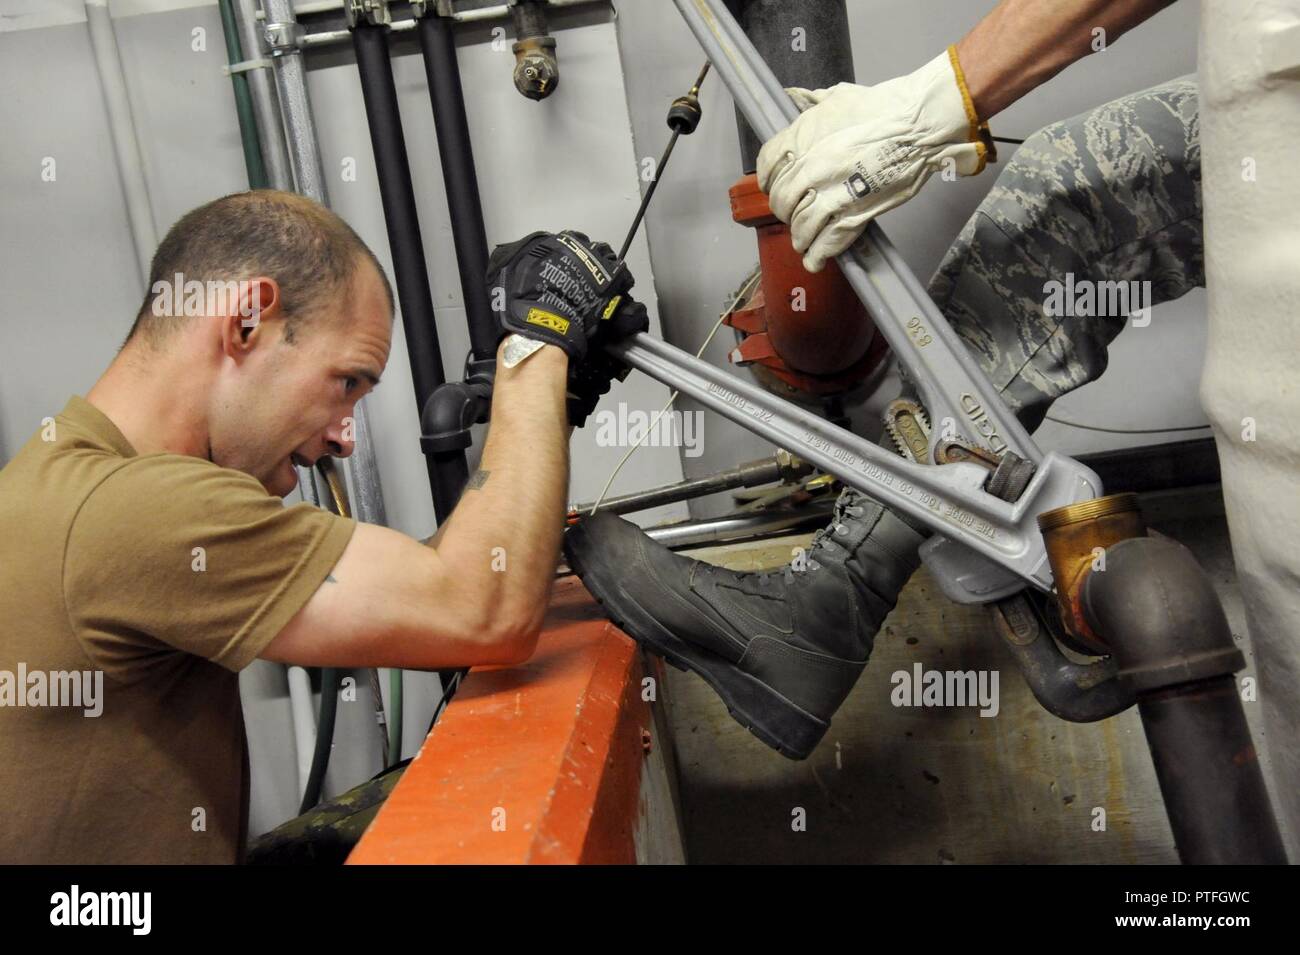 Canadian Armed Forces (CAF) Private Jacob Hodgin (left) works with Oregon Air National Guard Staff Sgt. Michael Templeton (right) as they work to install a new heating fuel tank at the Joint Task Force North (JTFN) Headquarters building, Yellowknife, Northwest Territories, Canada, July 19, 2017. The Oregon CES members are deployed for two-weeks for training along with CAF members from Cold Lake, Alberta. Stock Photo